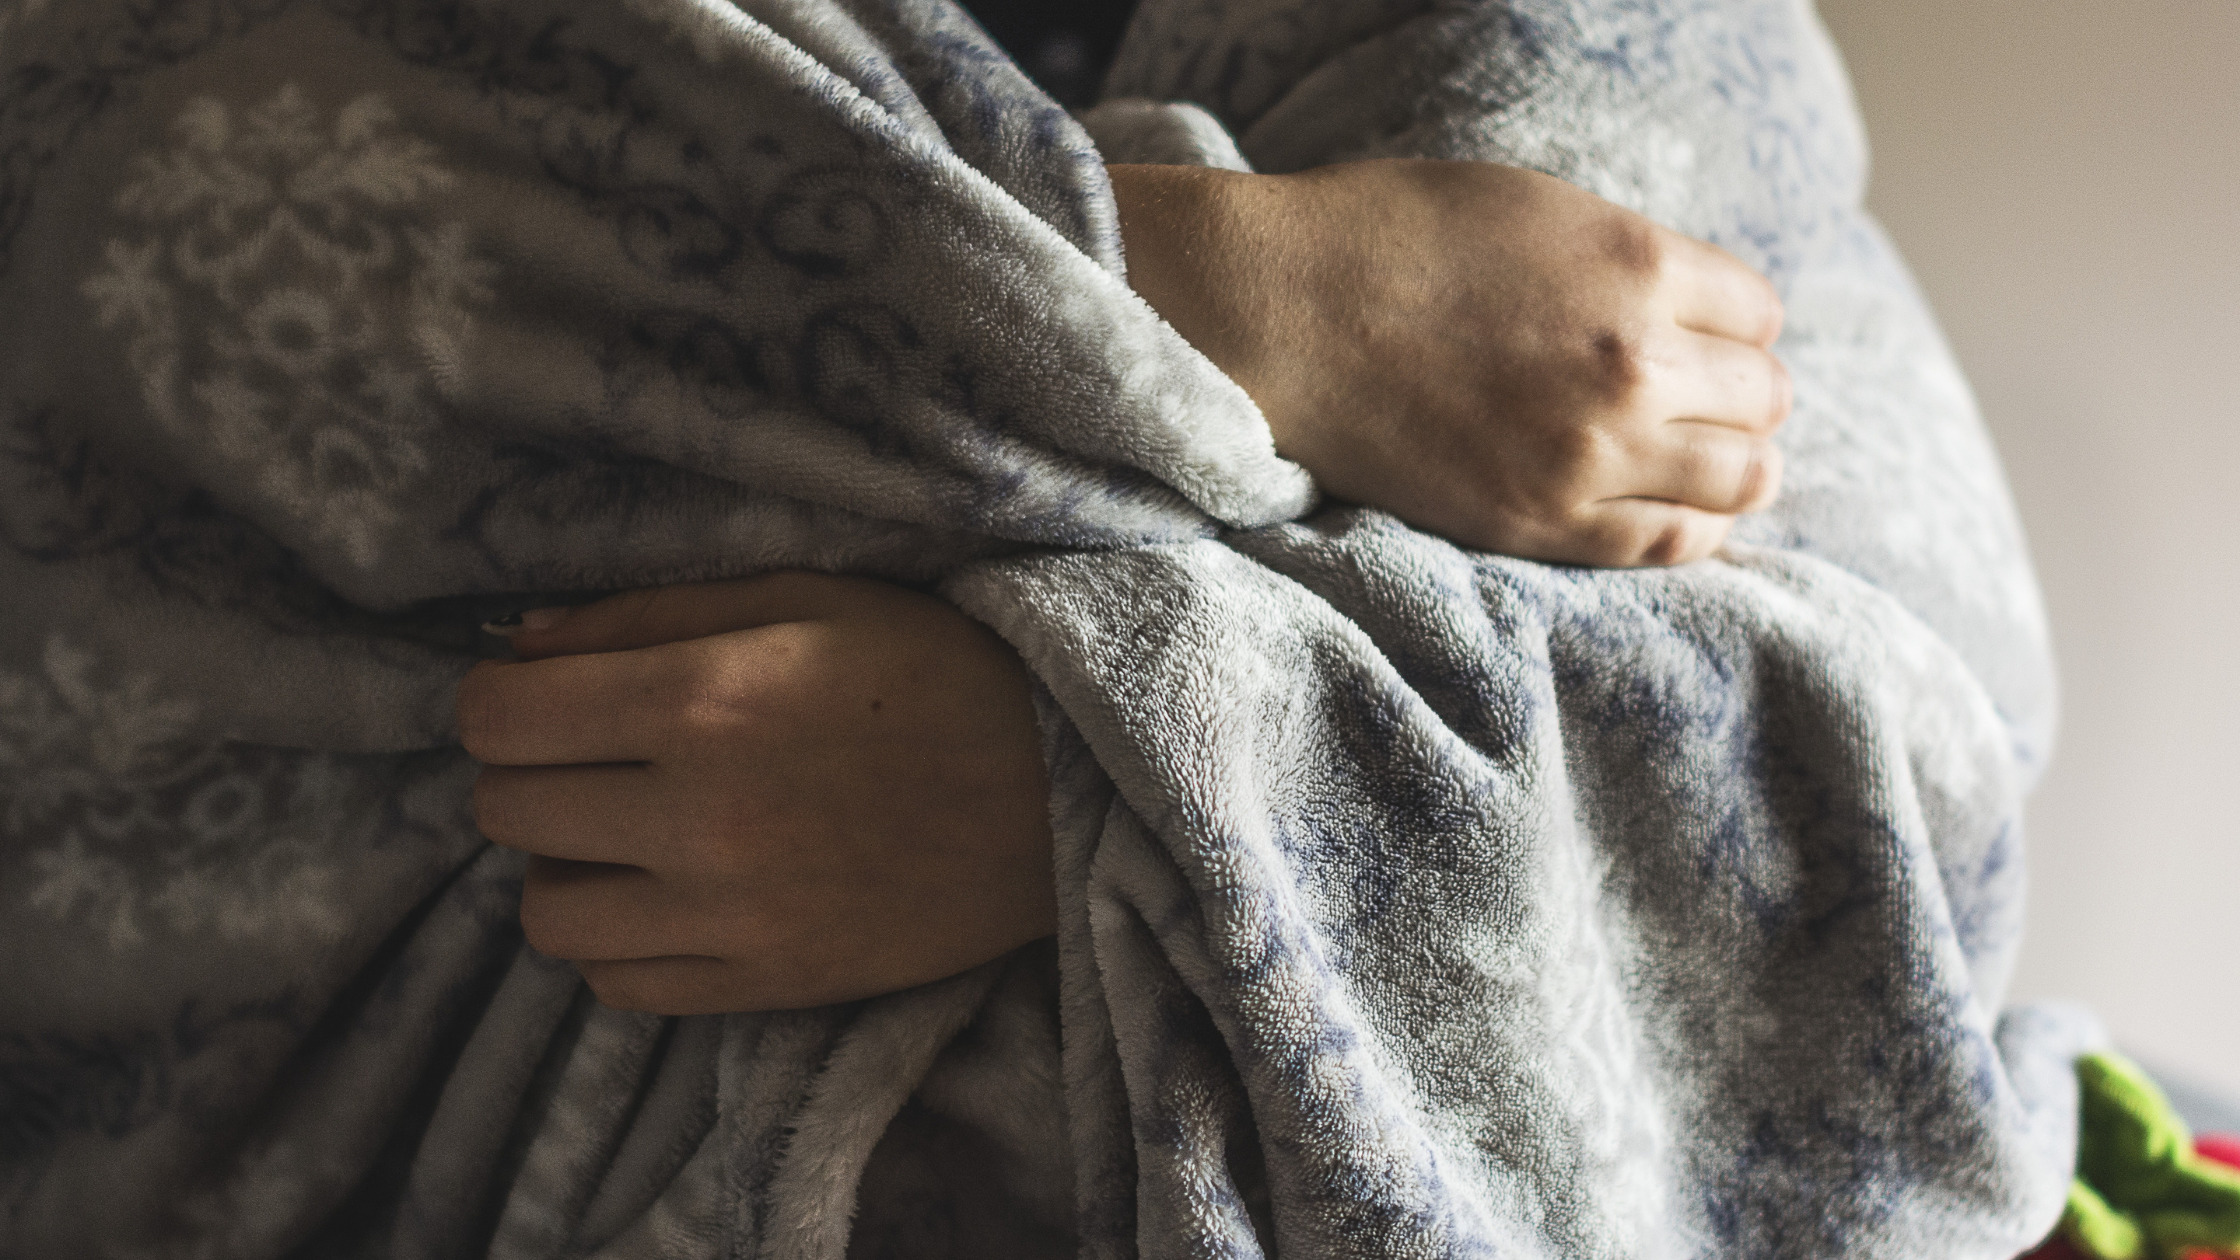 Use A Weighted Blanket To Get Better Sleep, For Anxiety, Depression, And ADHD. Learn How A Weighted Blanket Can Help Reduce Stress And Anxiety.